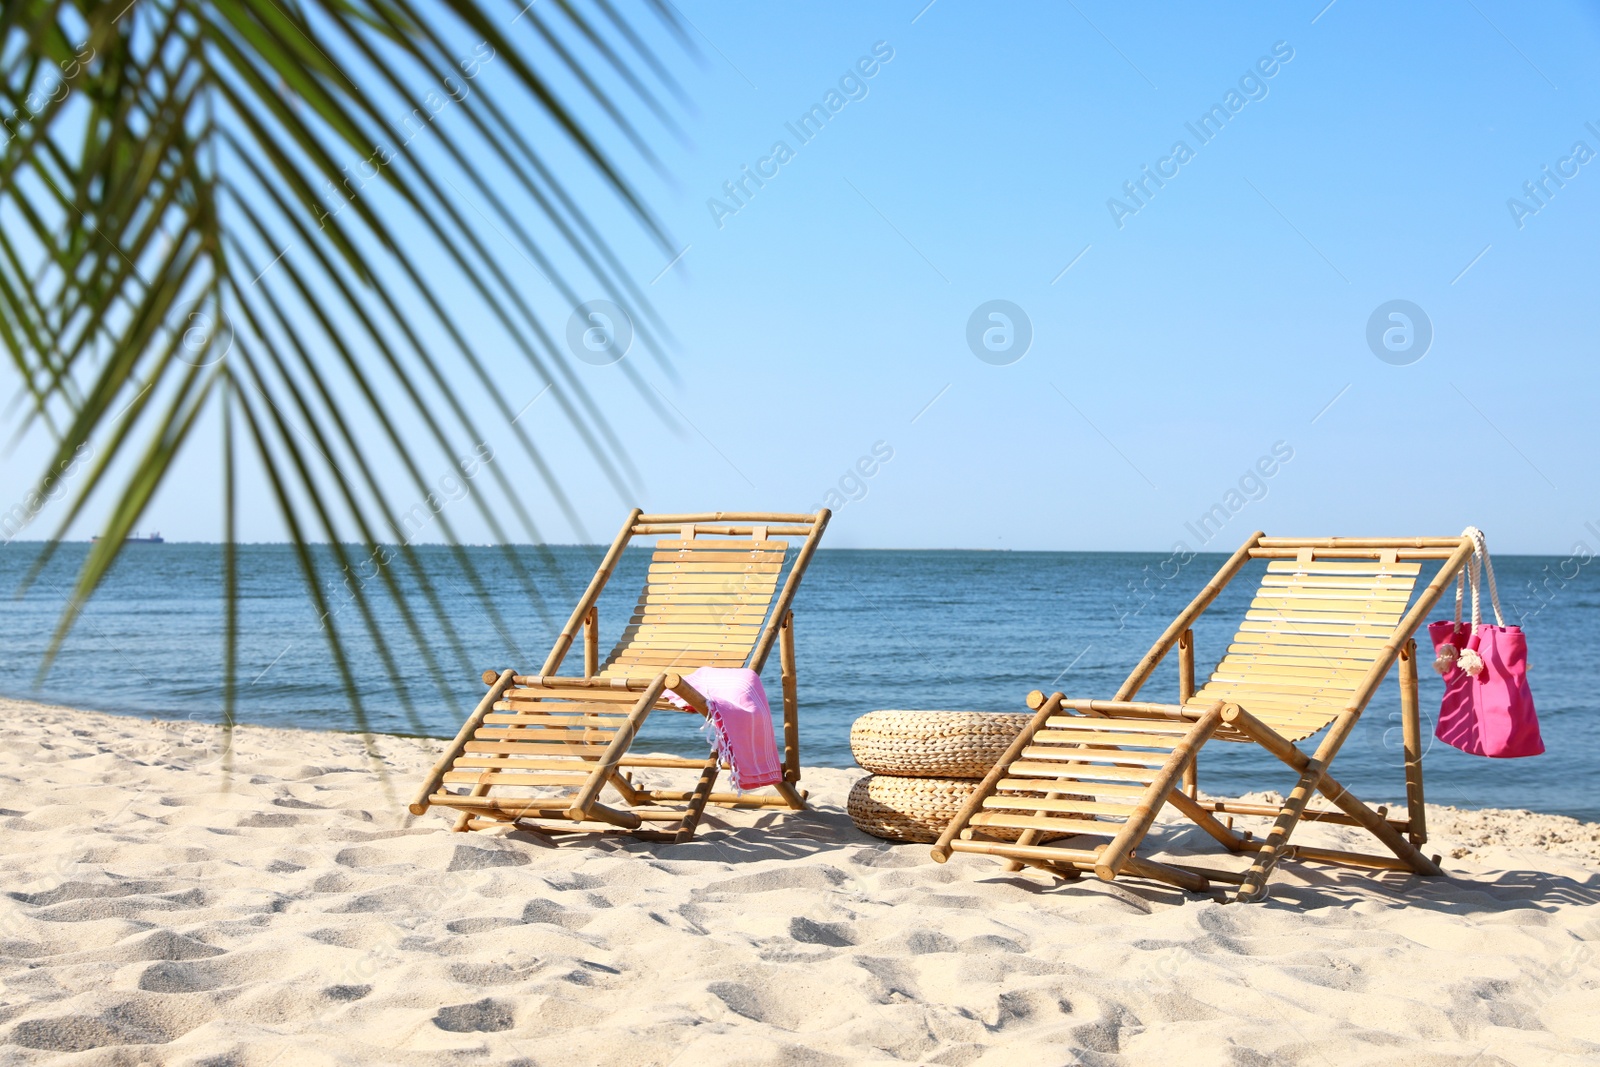 Photo of Wooden sunbeds and beach accessories on sandy shore